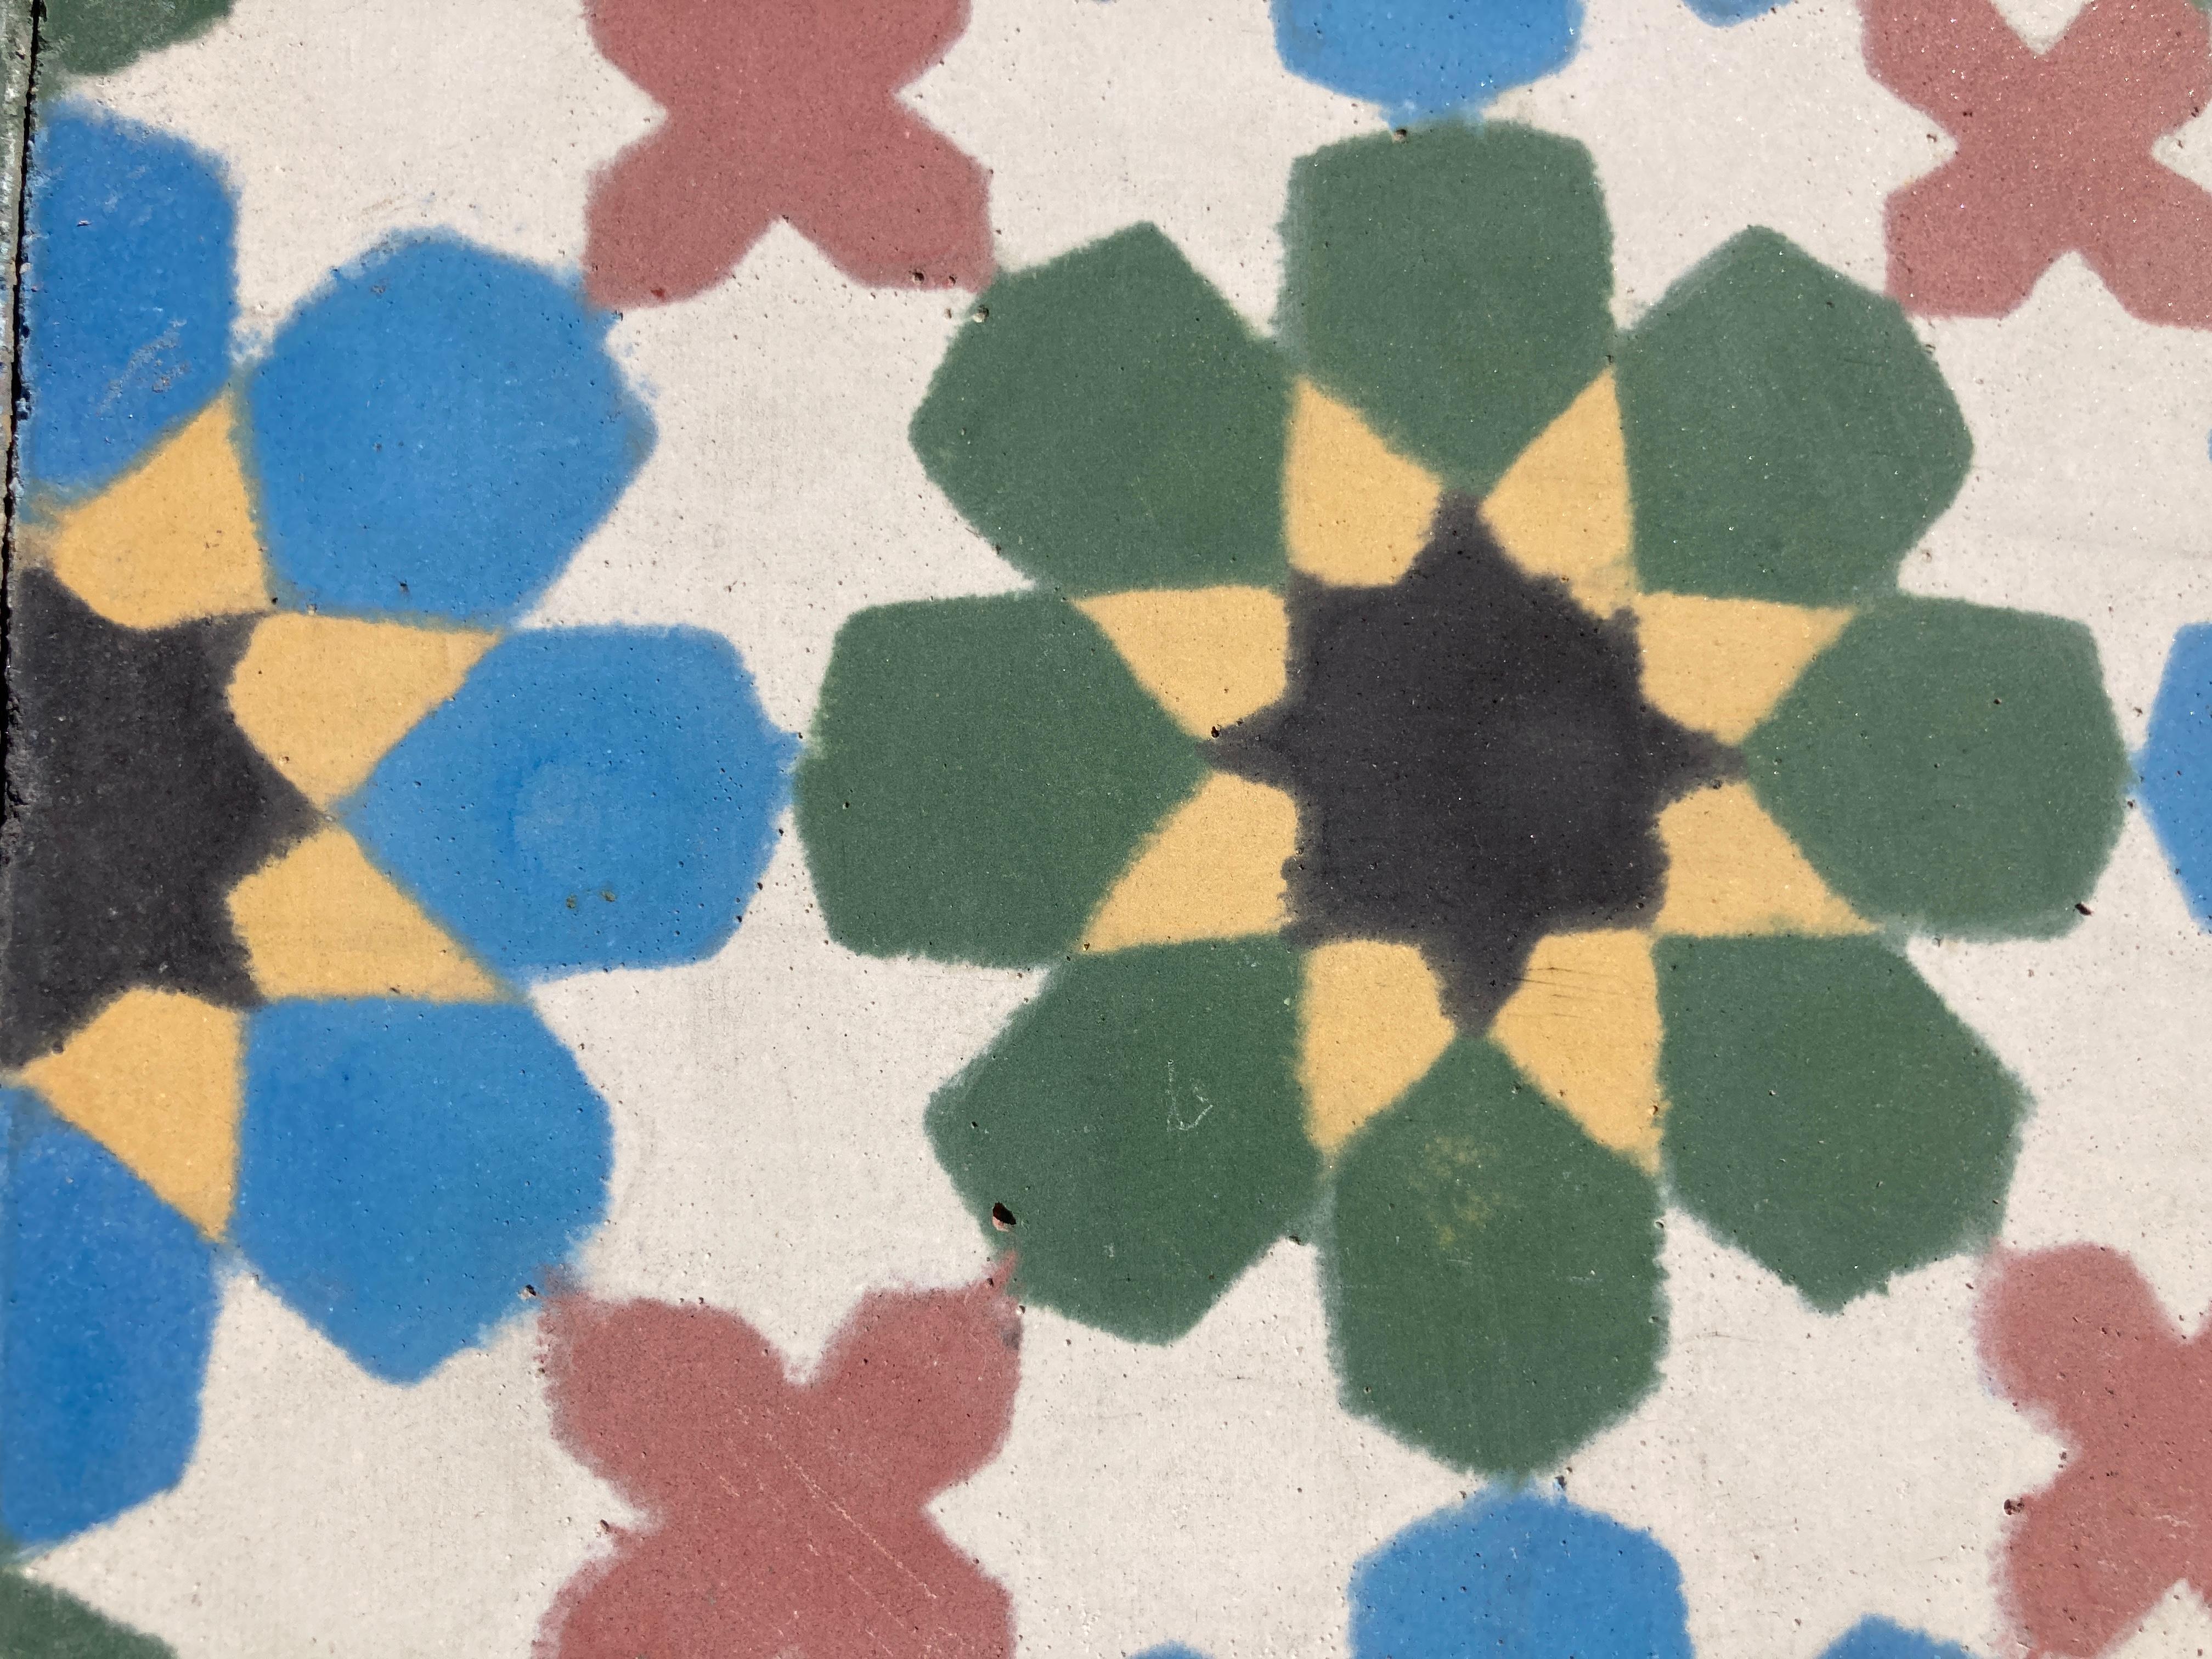 Late 20th Century Moroccan Hand-Crafted Encaustic Cement Tiles with Traditional Fez Moorish Design